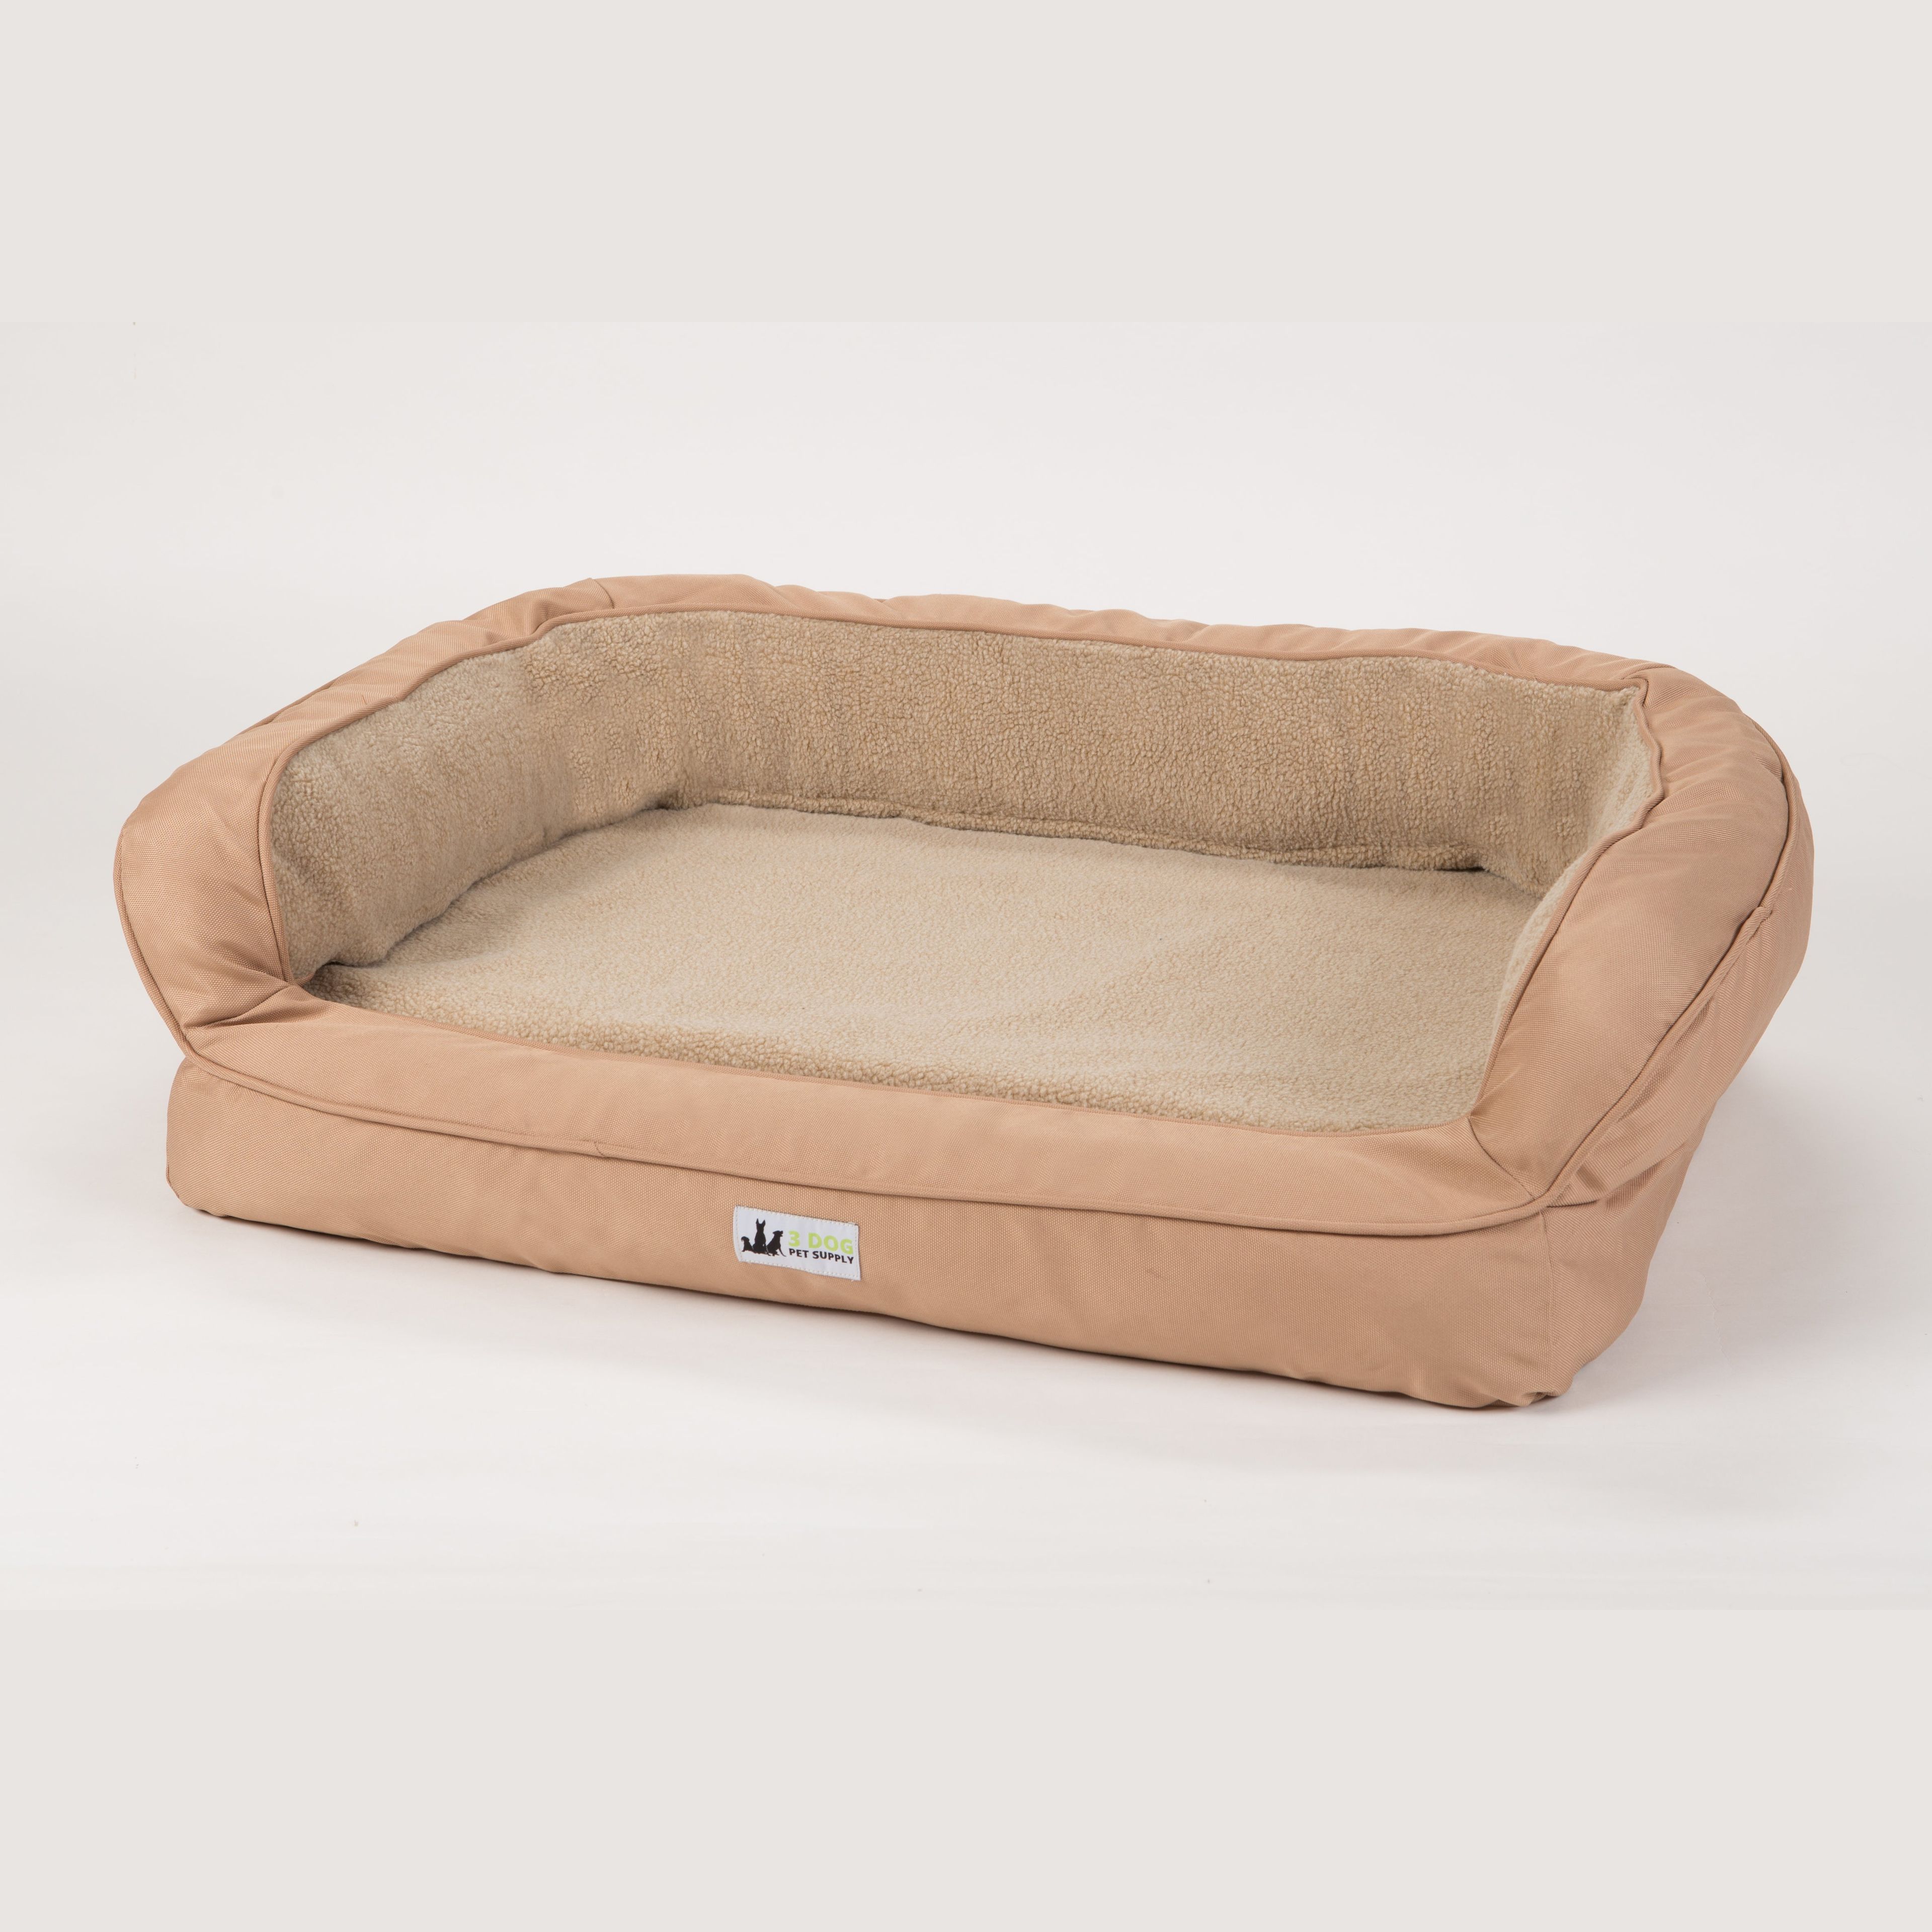 Replacement Fleece Sleep Surface Dog Bed Cover